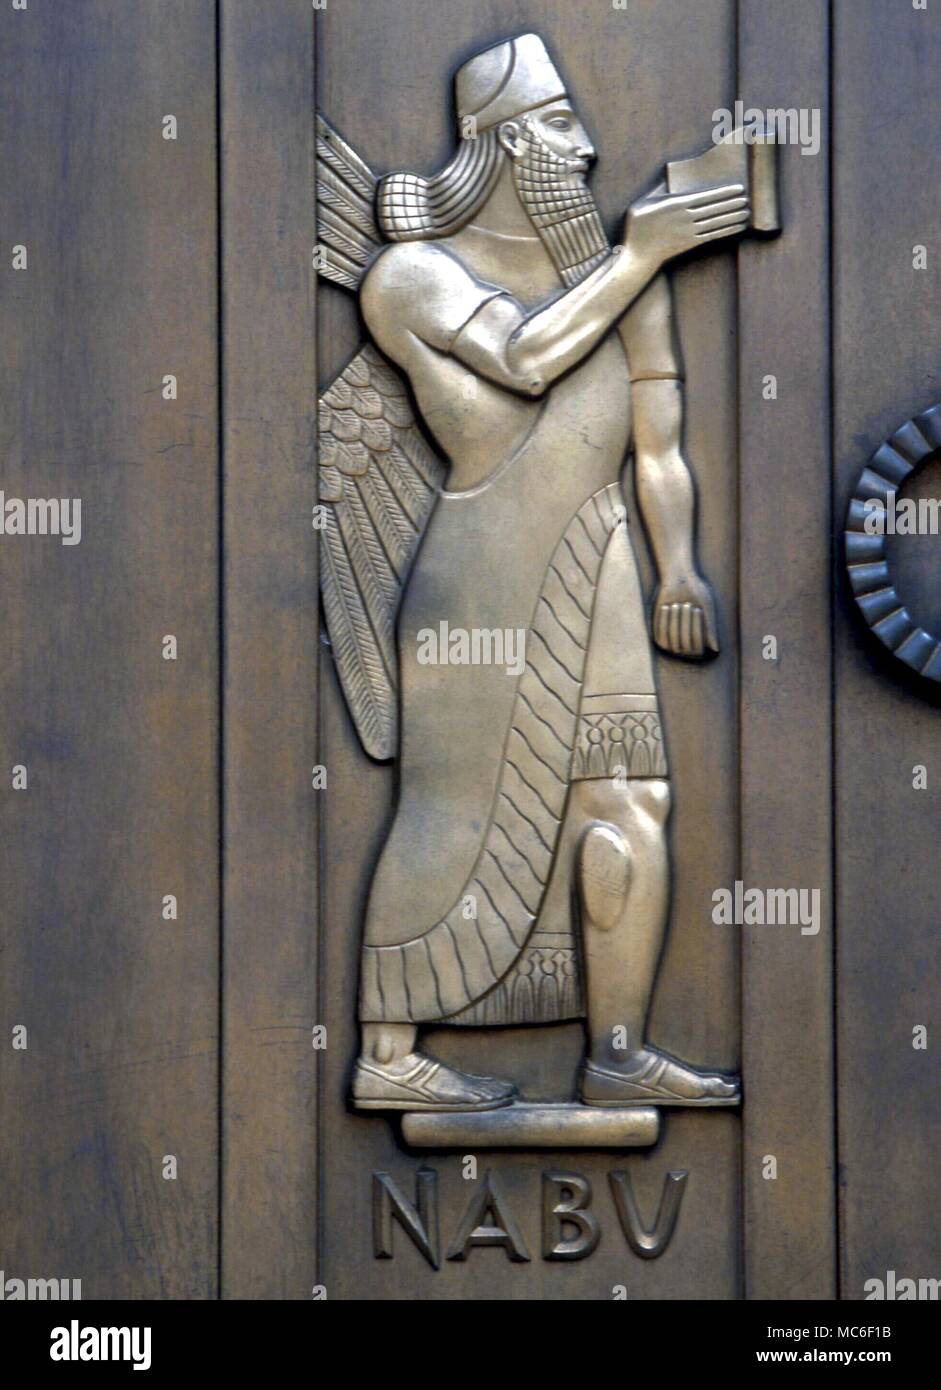 BABYLONIAN MYTHOLOGY Nabu, the god of wisdom in Babylonian mythology - the equivalent of Thoth, and guardian of the Tablets of Wisdom. Doors of the annex, Library of congress, Washington DC Stock Photo